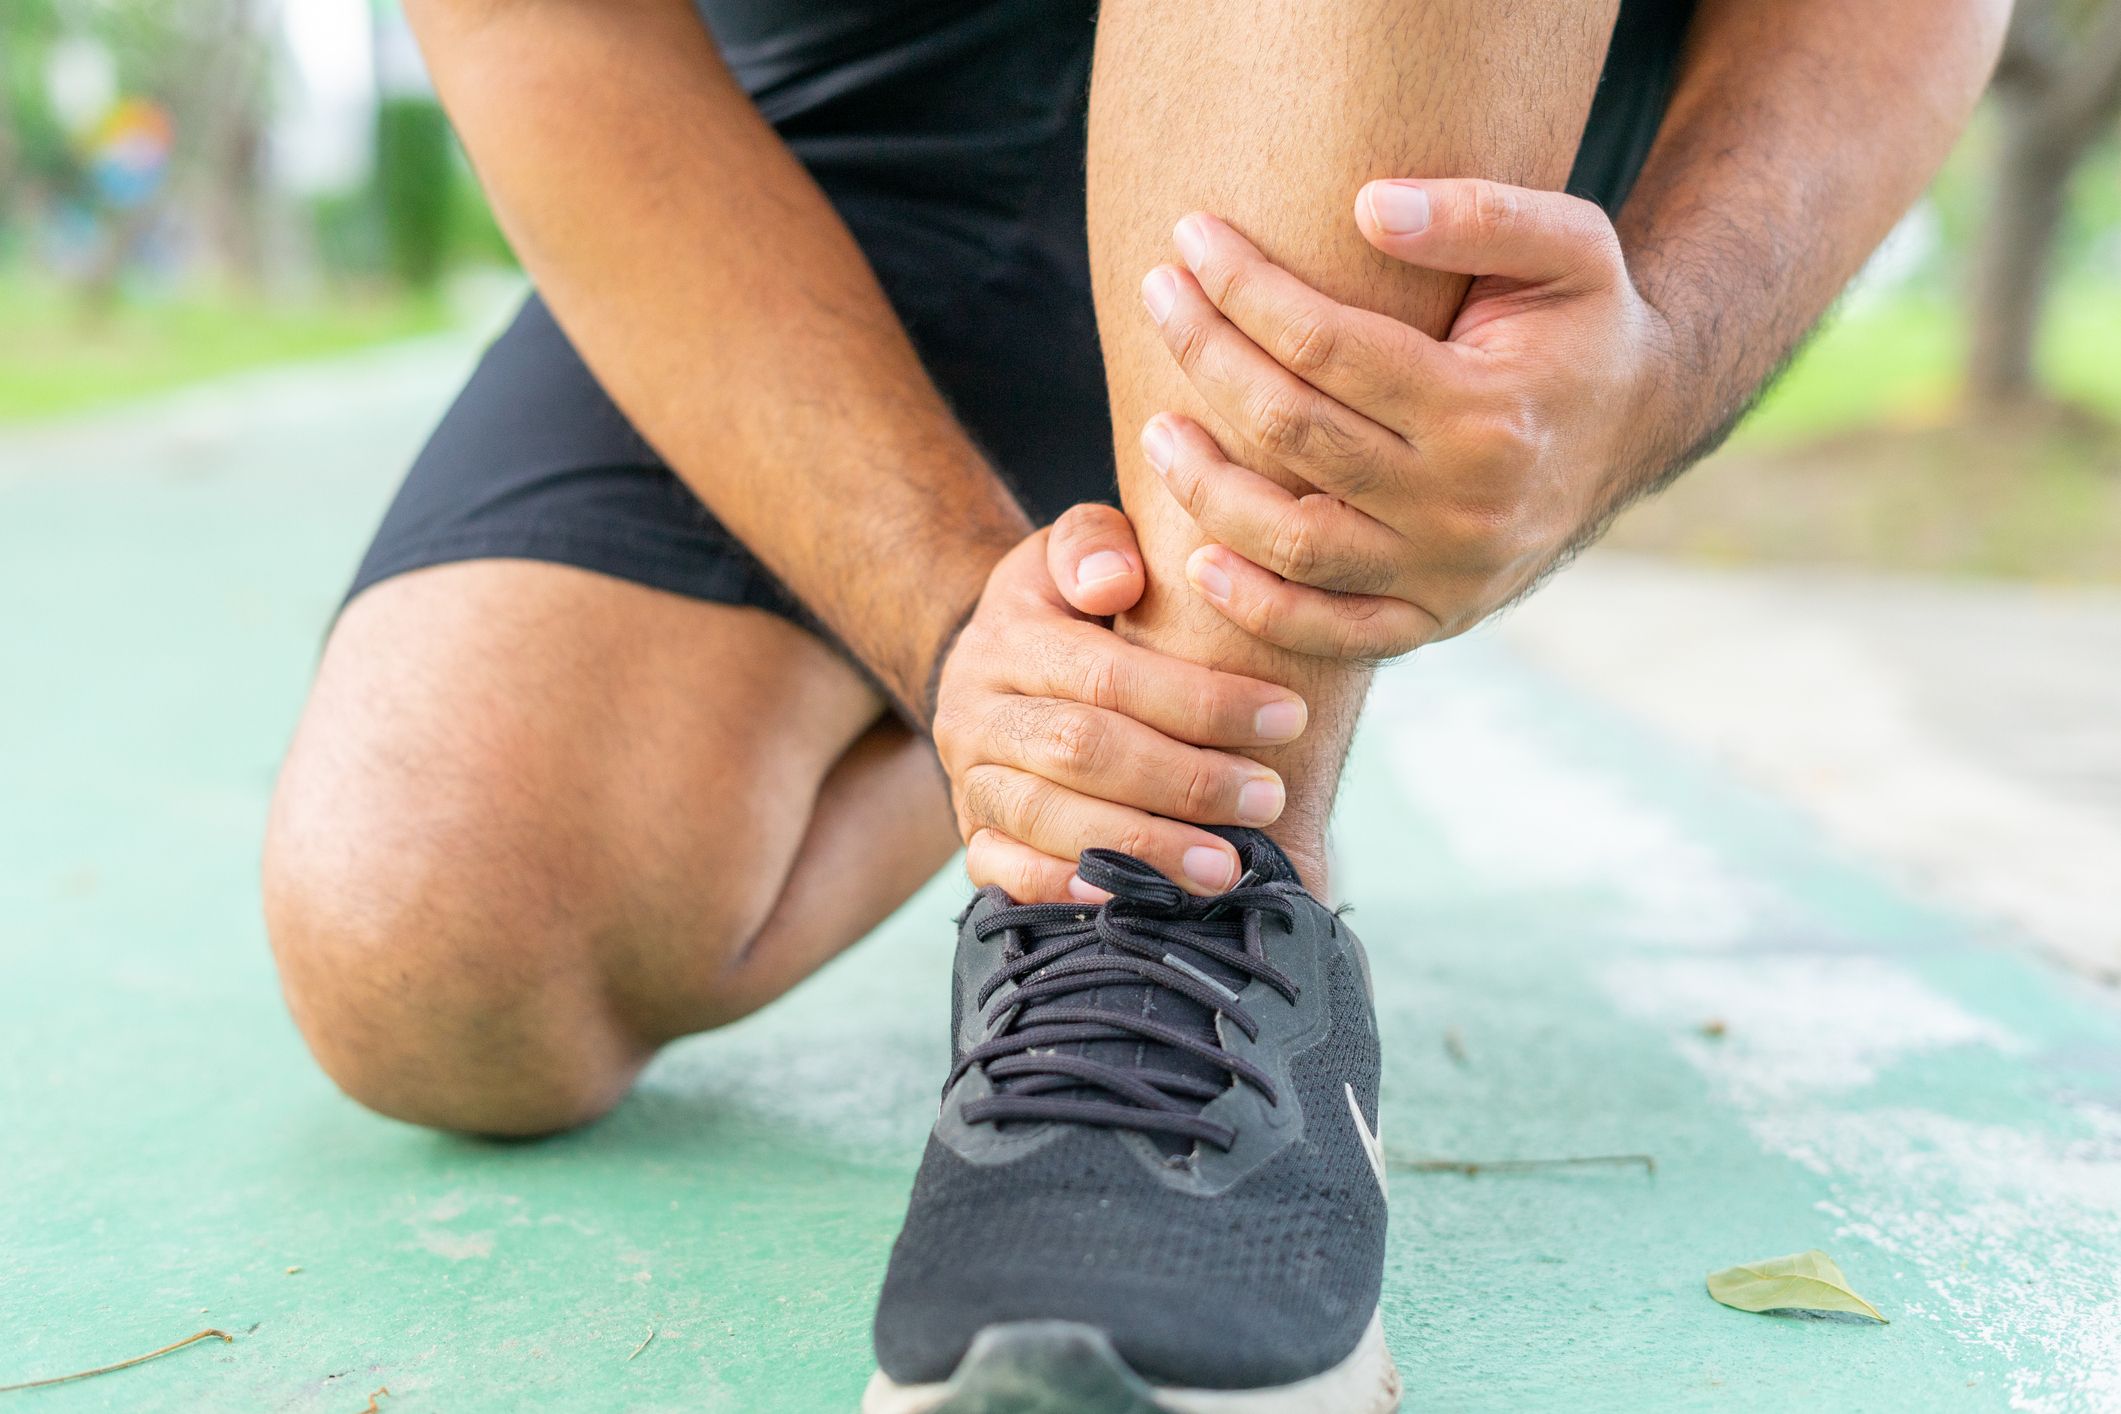 The Runner’s Guide to Dealing With Ankle Sprains